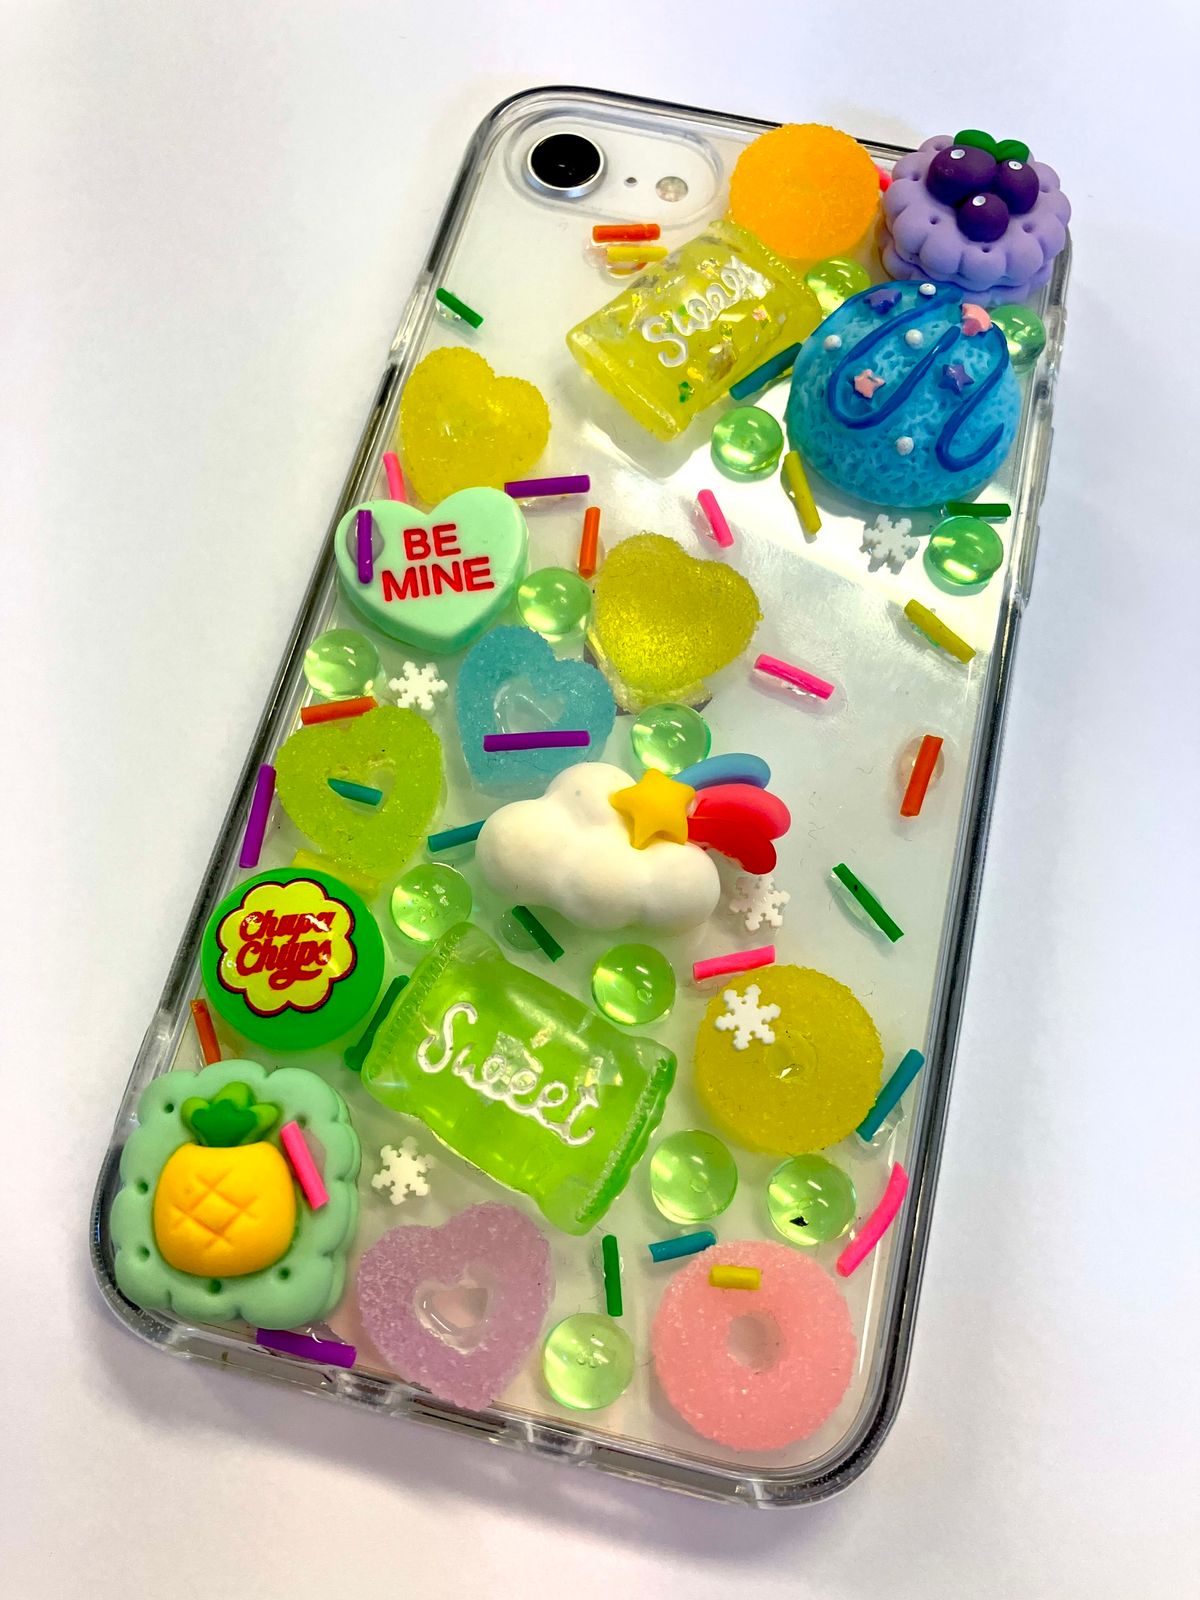 Fancy Phone Covers or Notebooks Workshop, 5-10 yrs, Wed 26th Jun, 1-3pm